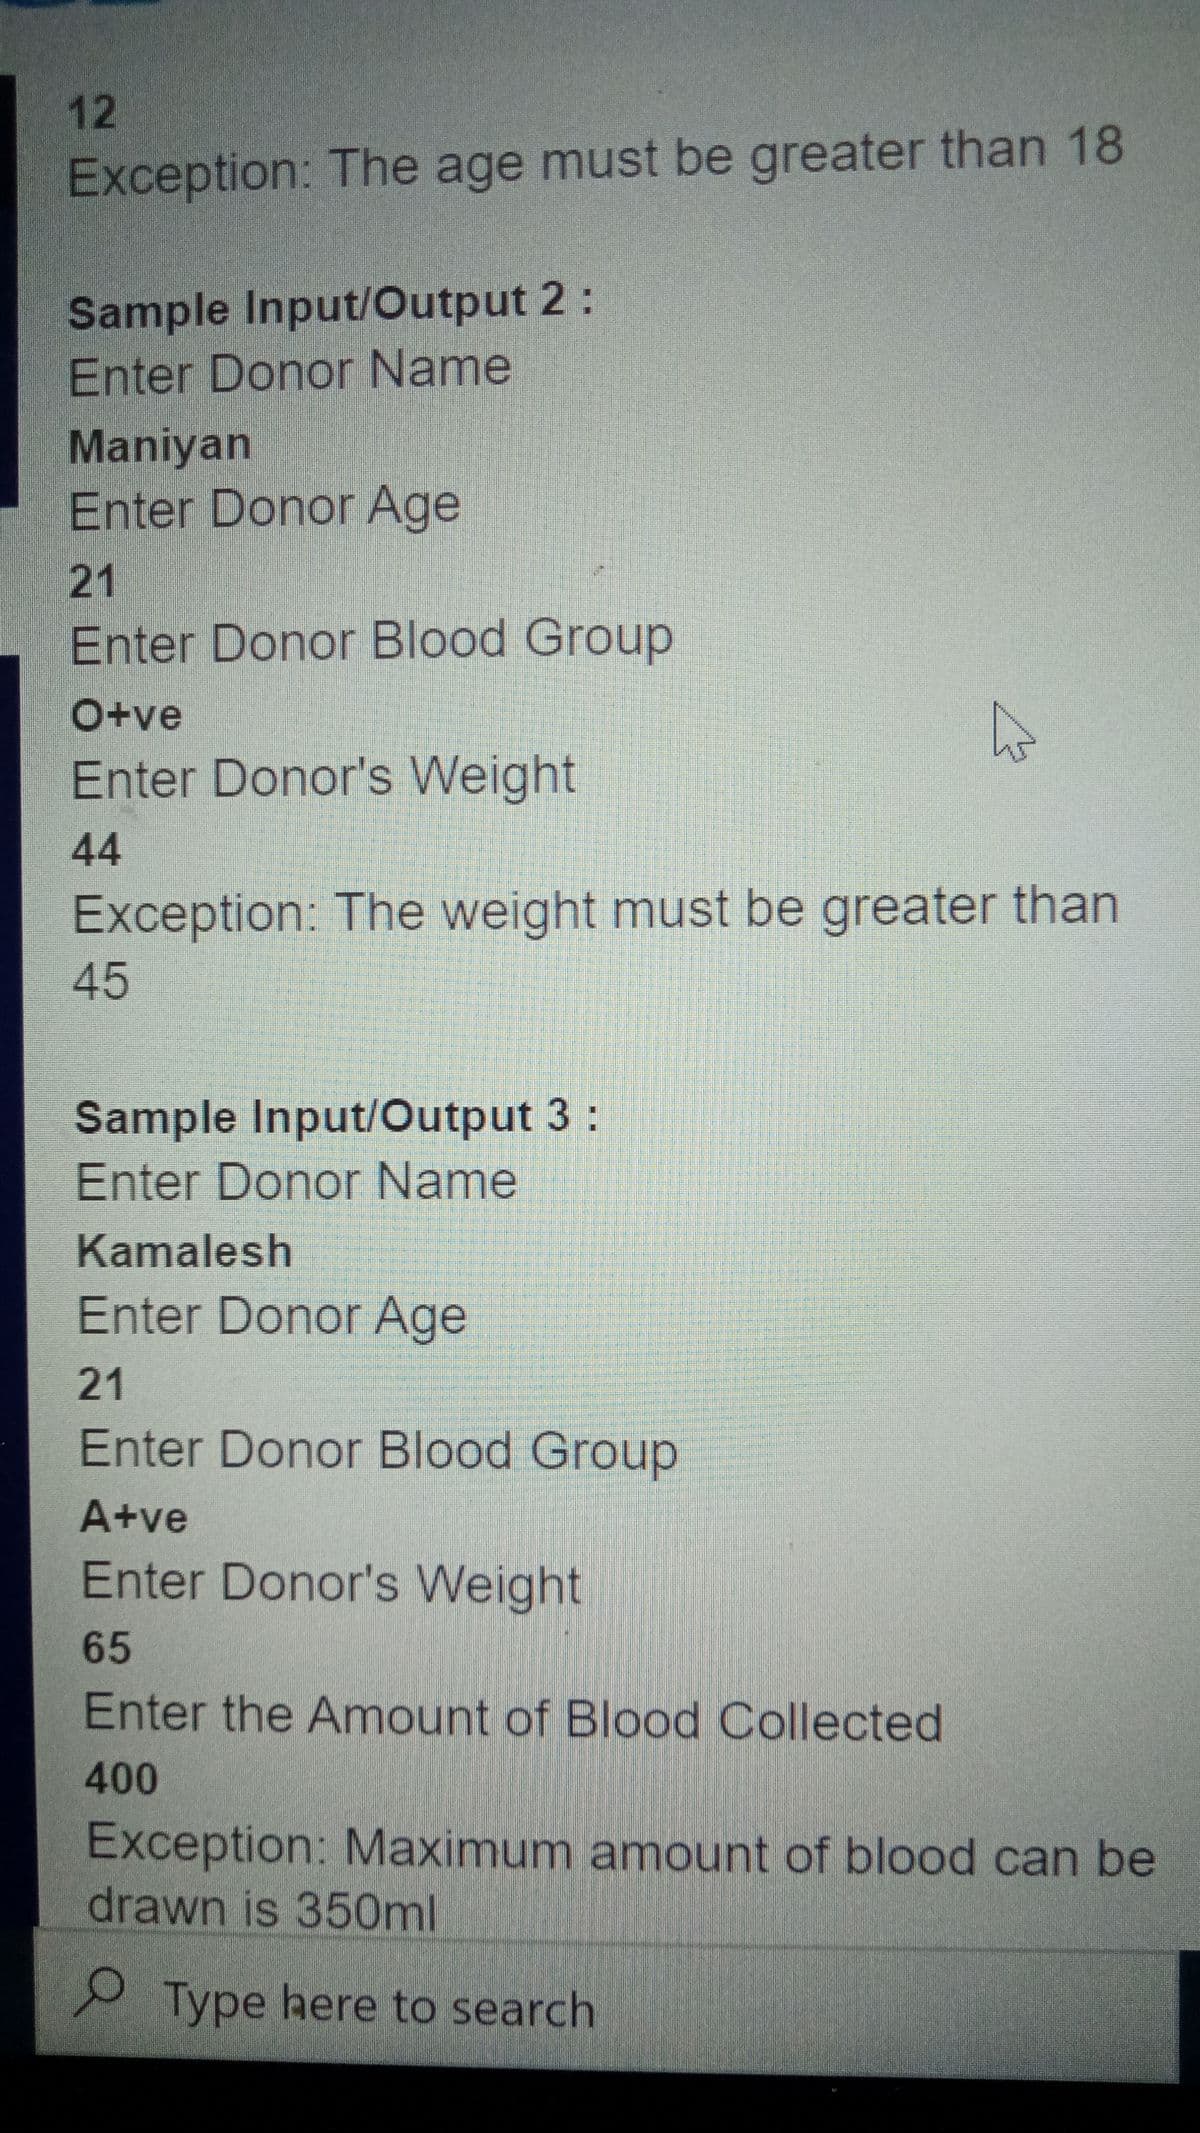 12
Exception: The age must be greater than 18
Sample Input/Output 2:
Enter Donor Name
Maniyan
Enter Donor Age
|21
Enter Donor Blood Group
O+ve
Enter Donor's Weight
44
Exception: The weight must be greater than
45
Sample Input/Output 3:
Enter Donor Name
Kamalesh
Enter Donor Age
21
Enter Donor Blood Group
A+ve
Enter Donor's Weight
65
Enter the Amount of Blood Collected
400
Exception: Maximum amount of blood can be
drawn is 350ml
Type here to search
